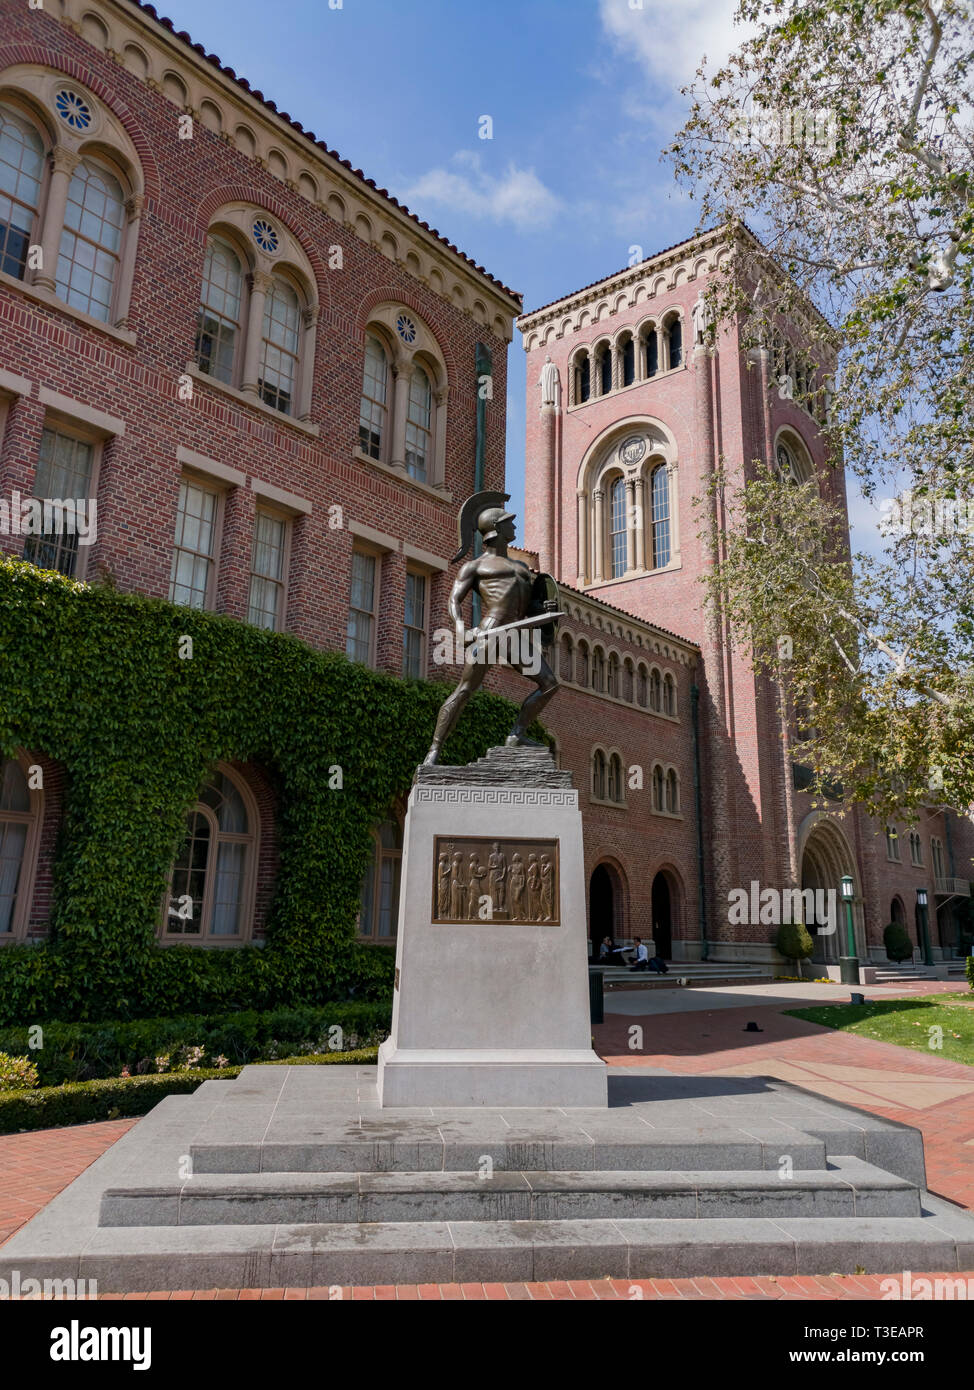 Los Angeles, APR 2: Tommy Trojan, Bovard Auditorium of USC on APR 2, 2019 at Los Angeles, California Stock Photo